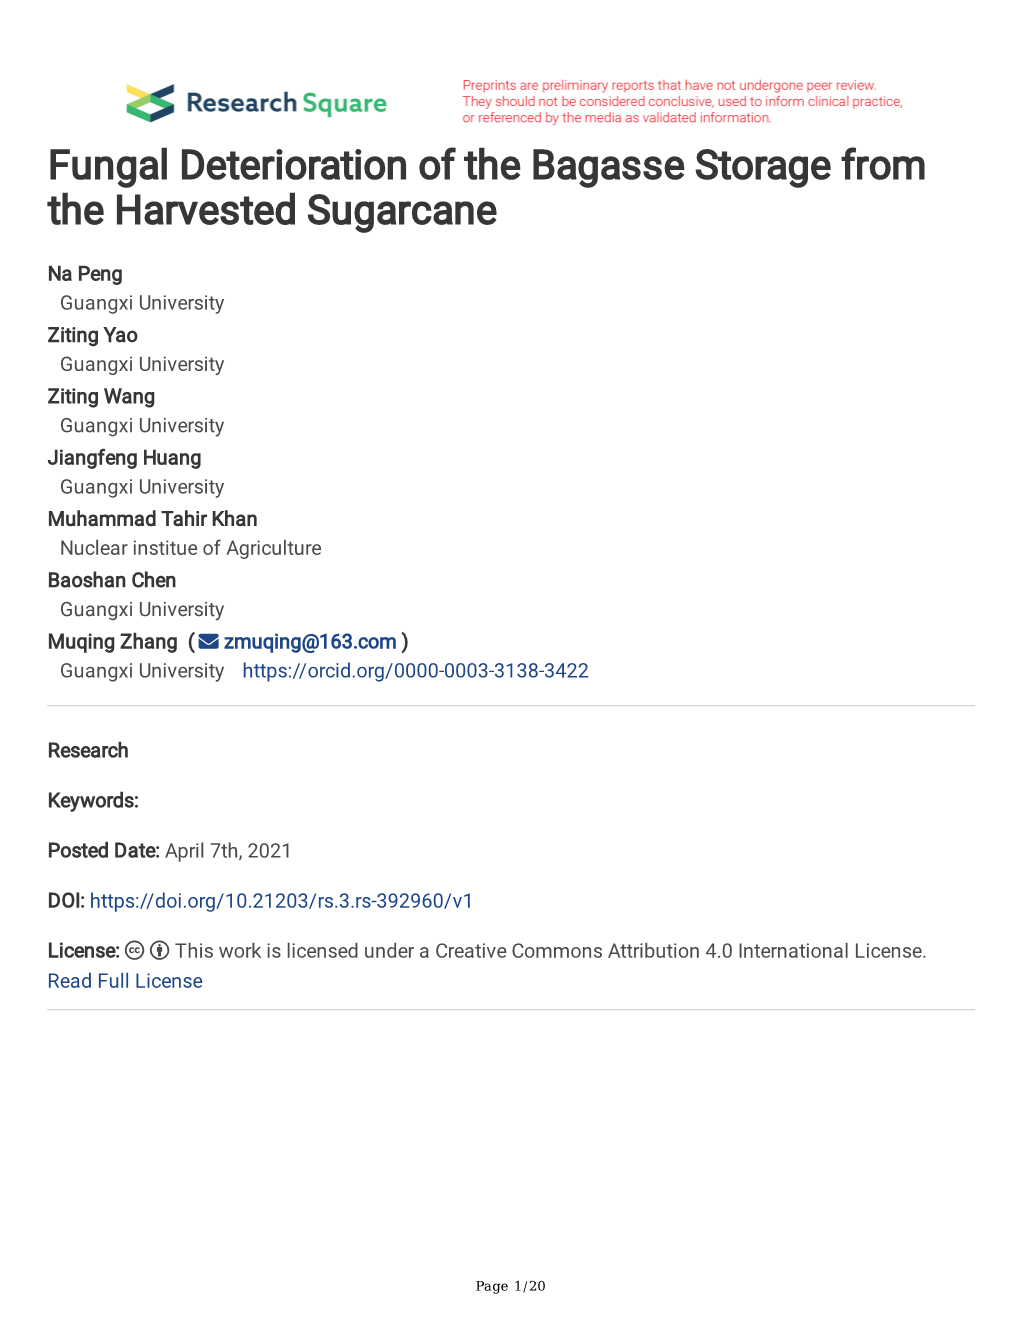 Fungal Deterioration of the Bagasse Storage from the Harvested Sugarcane